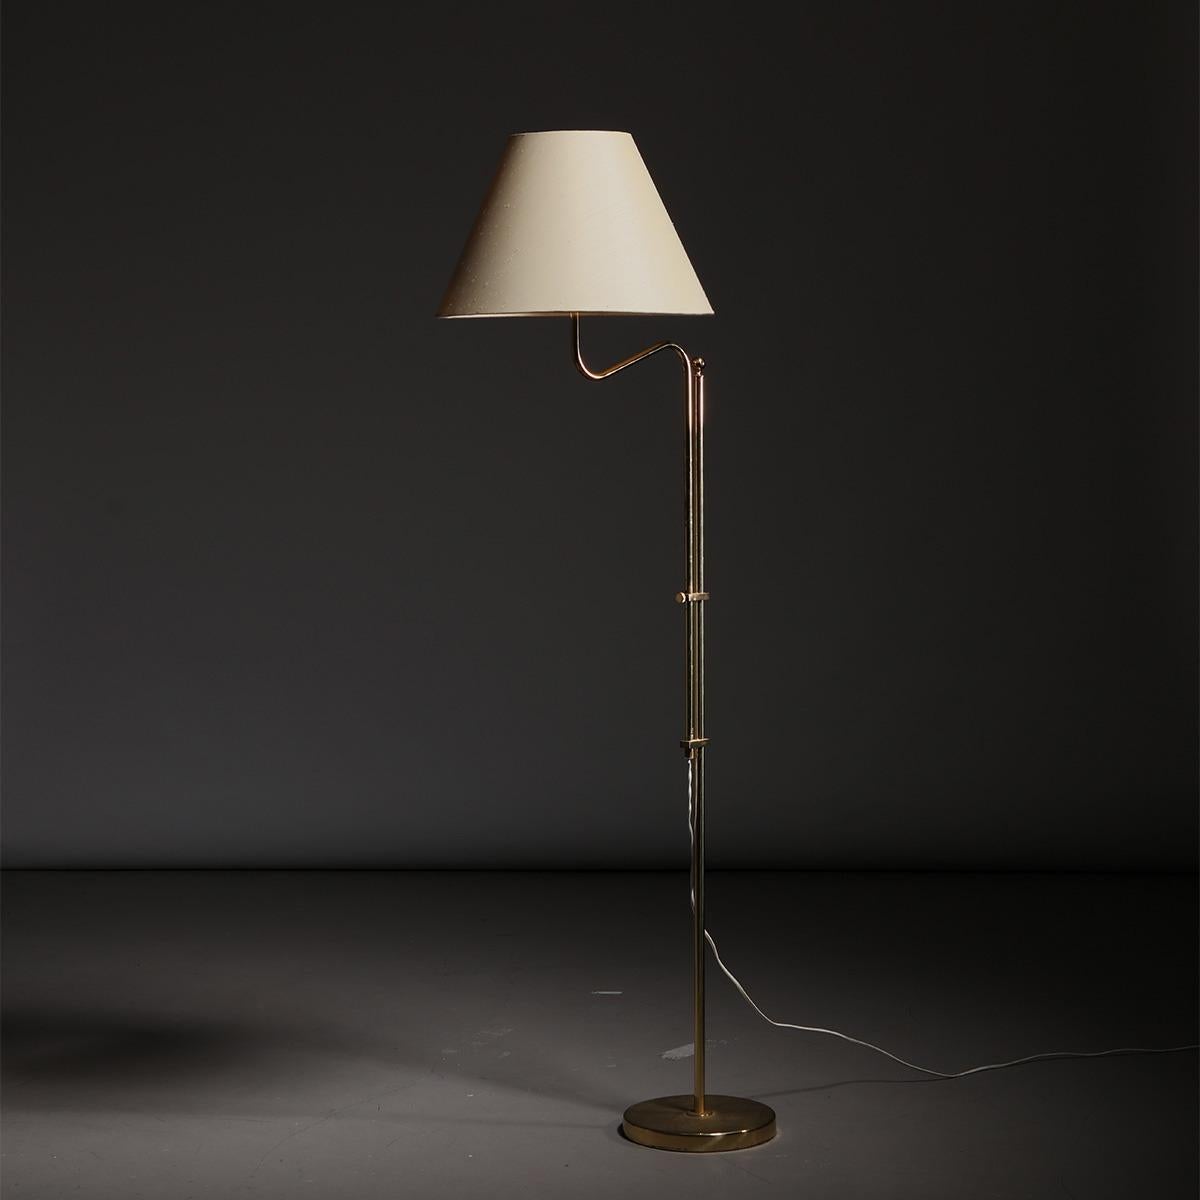 Adjustable brass floor lamp, model G132, made by Bergboms in Sweden, 1970s.

This floor lamp features a beautiful sculptural stem in brass with a mechanism allowing the lamp's height to be easily adjusted. The lamp of course also features a large